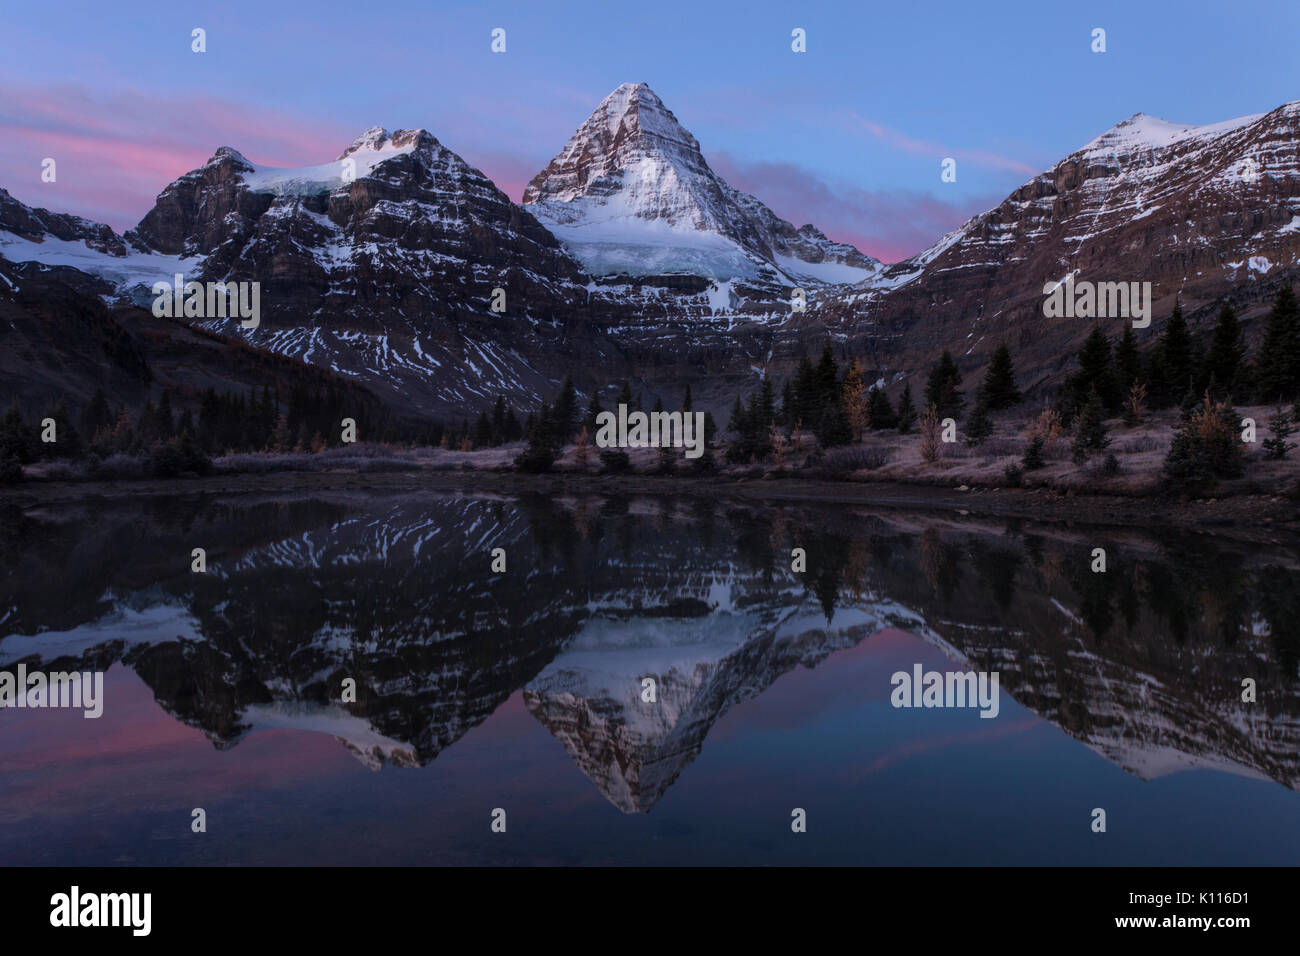 Mount Assiniboine reflected in a tarn near Lage Magog before sunrise, Mount Assiniboine Provincial Park, Rocky Mountains, British Columbia, Canada. Stock Photo